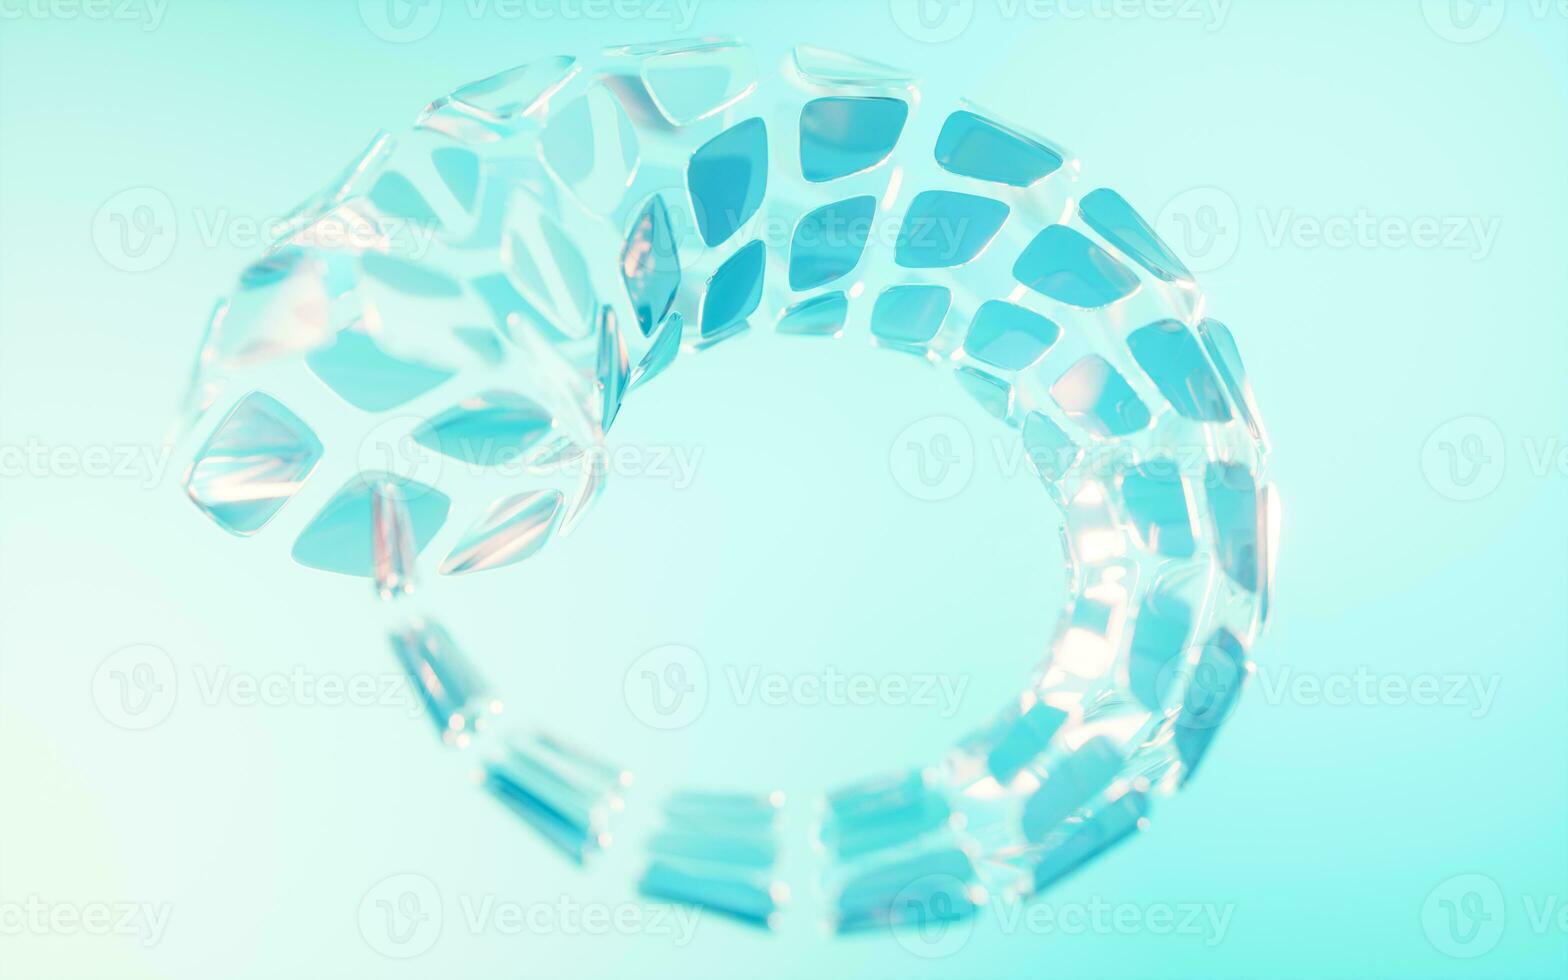 abstract glas geometrie achtergrond, 3d weergave. foto